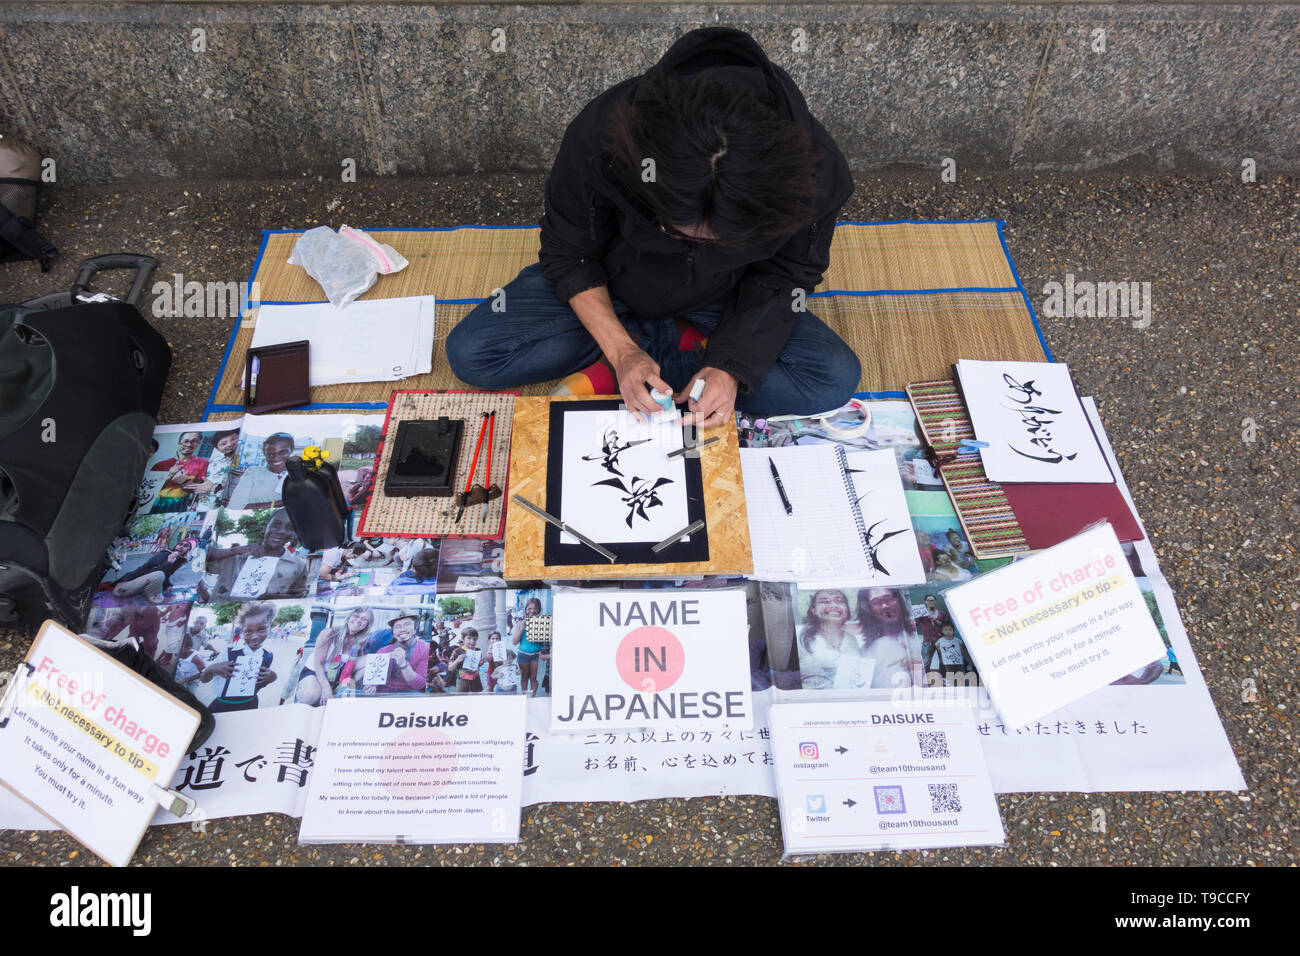 A Japanese calligrapher at work on London's Southbank - Your Name in Japanese Stock Photo